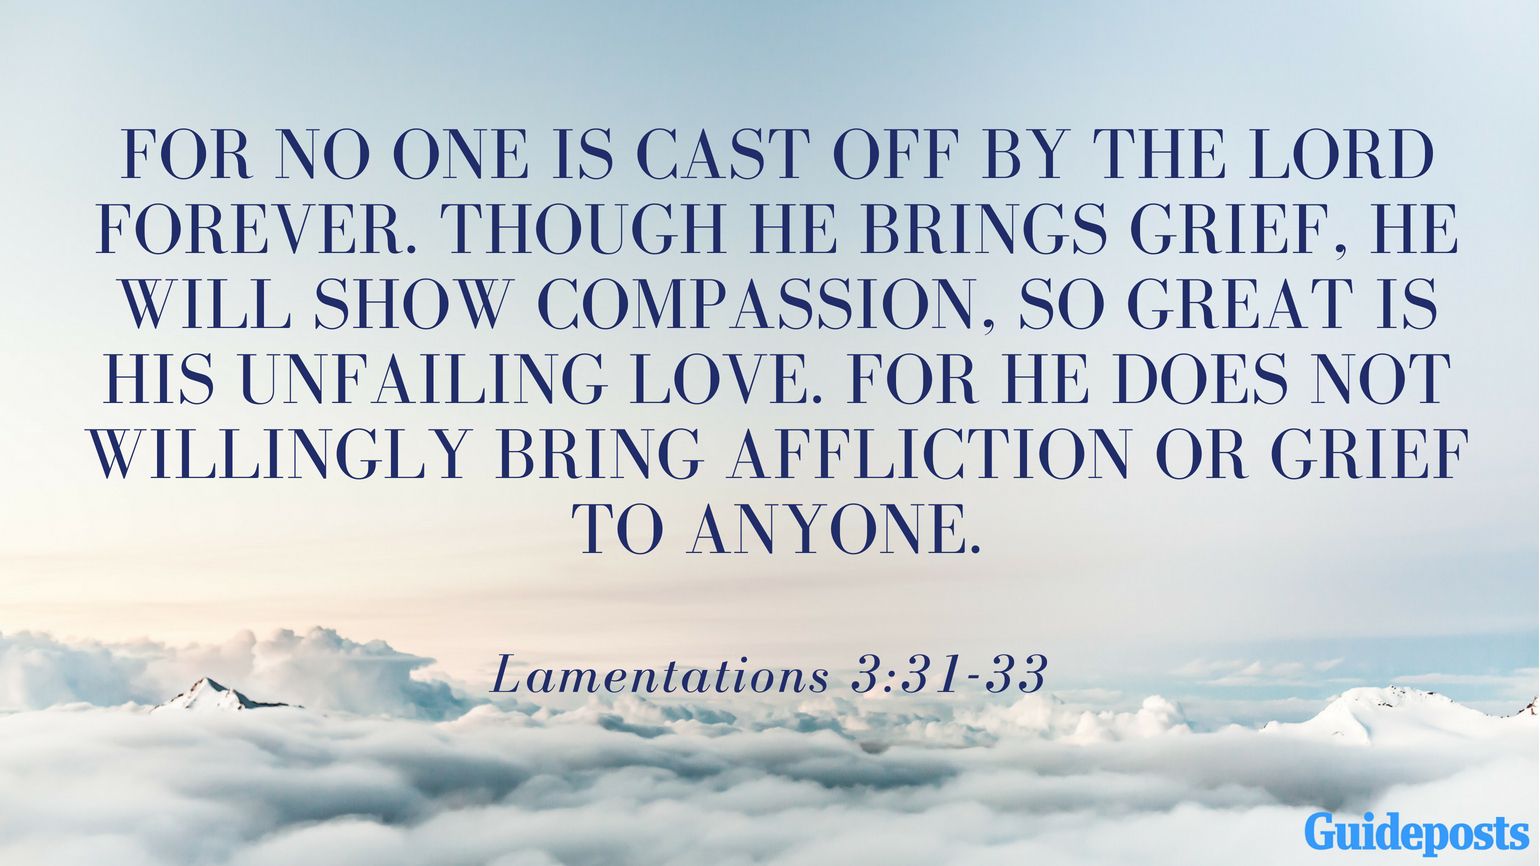 Bible Verse for Coping With Grief: For no one is cast off by the Lord forever. Though he brings grief, he will show compassion, so great is his unfailing love. For he does not willingly bring affliction or grief to anyone. Lamentations 3:31-33 Better Living Life Advice